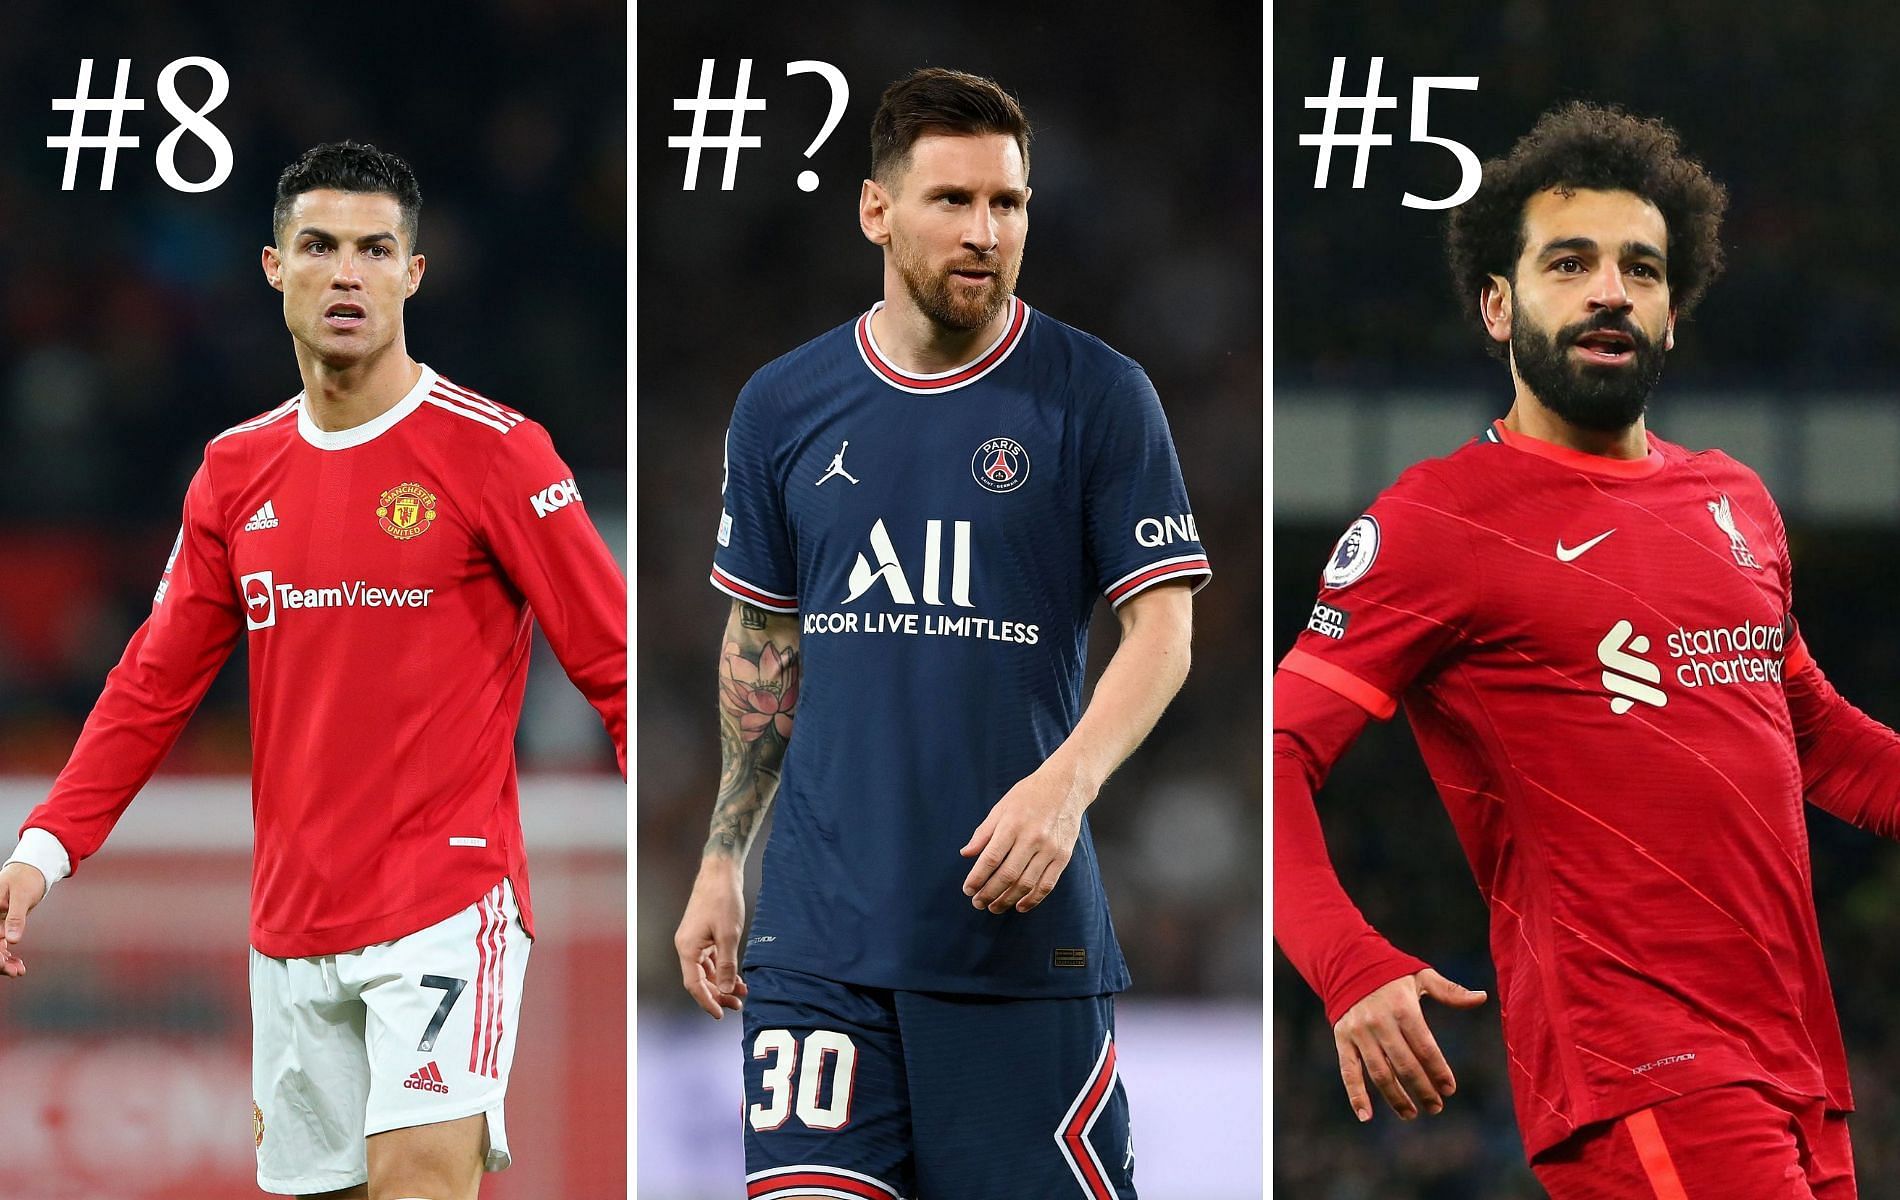 Lionel Messi and Cristiano Ronaldo aren&#039;t in the top 5 when it comes to the goal-scoring list